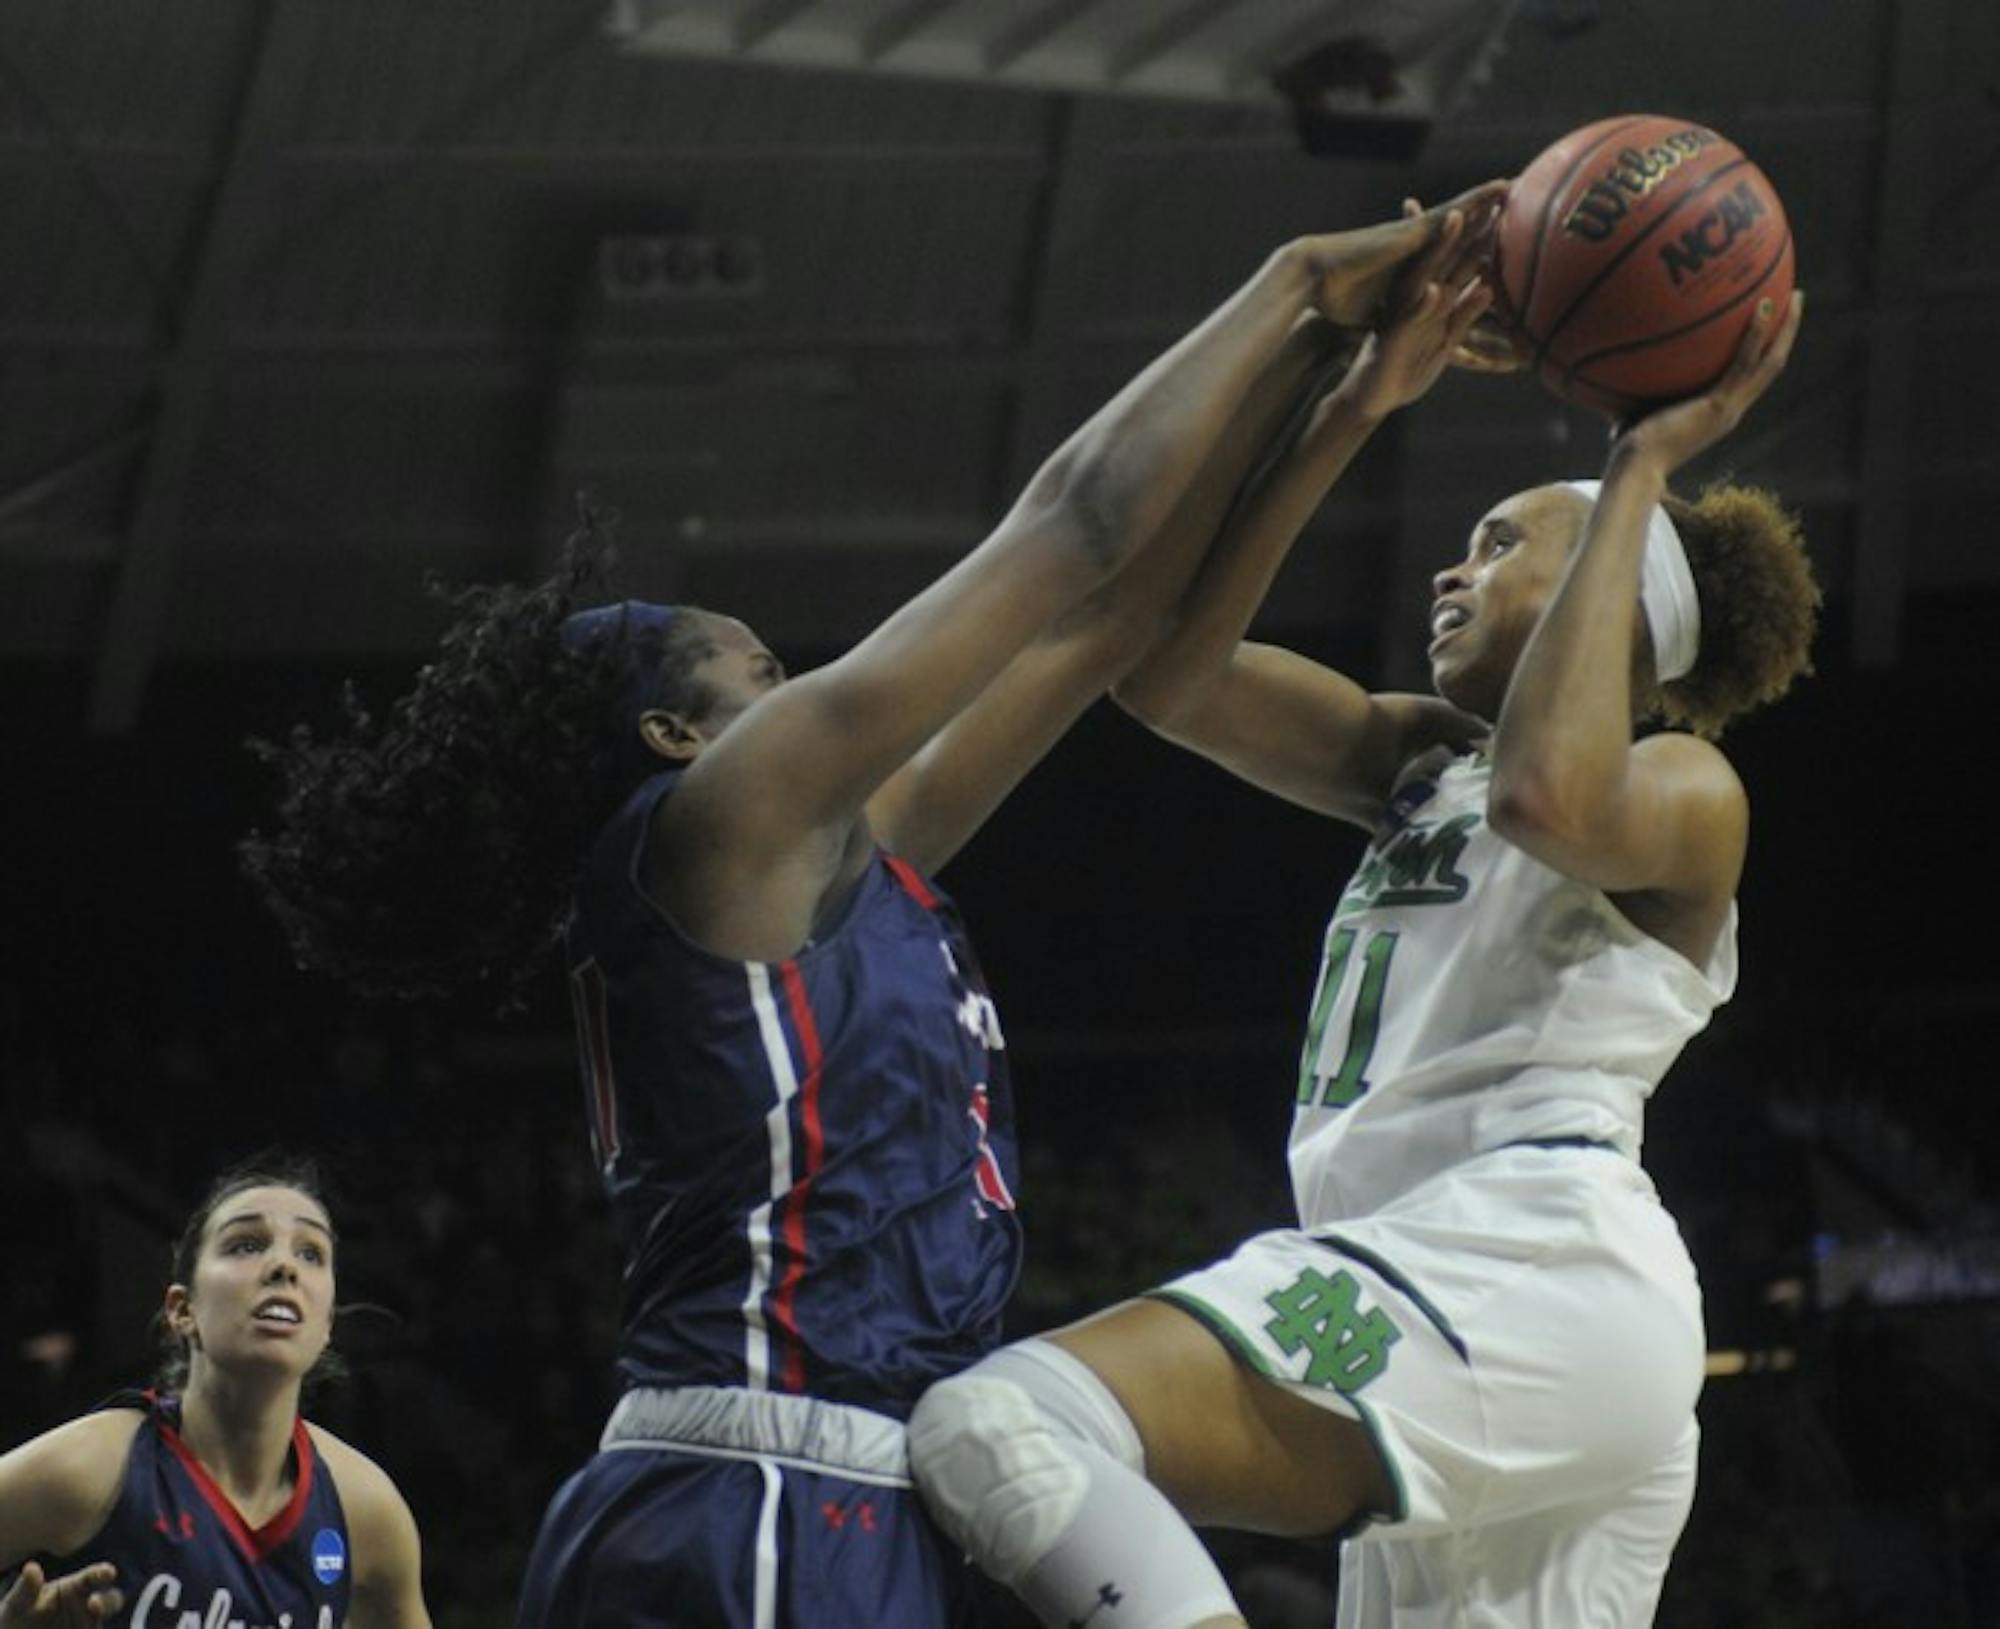 Irish junior forward Brianna Turner fights through contact while attempting a layup during Notre Dame’s 79-49 win over Robert Morris on Friday at Purcell Pavilion.